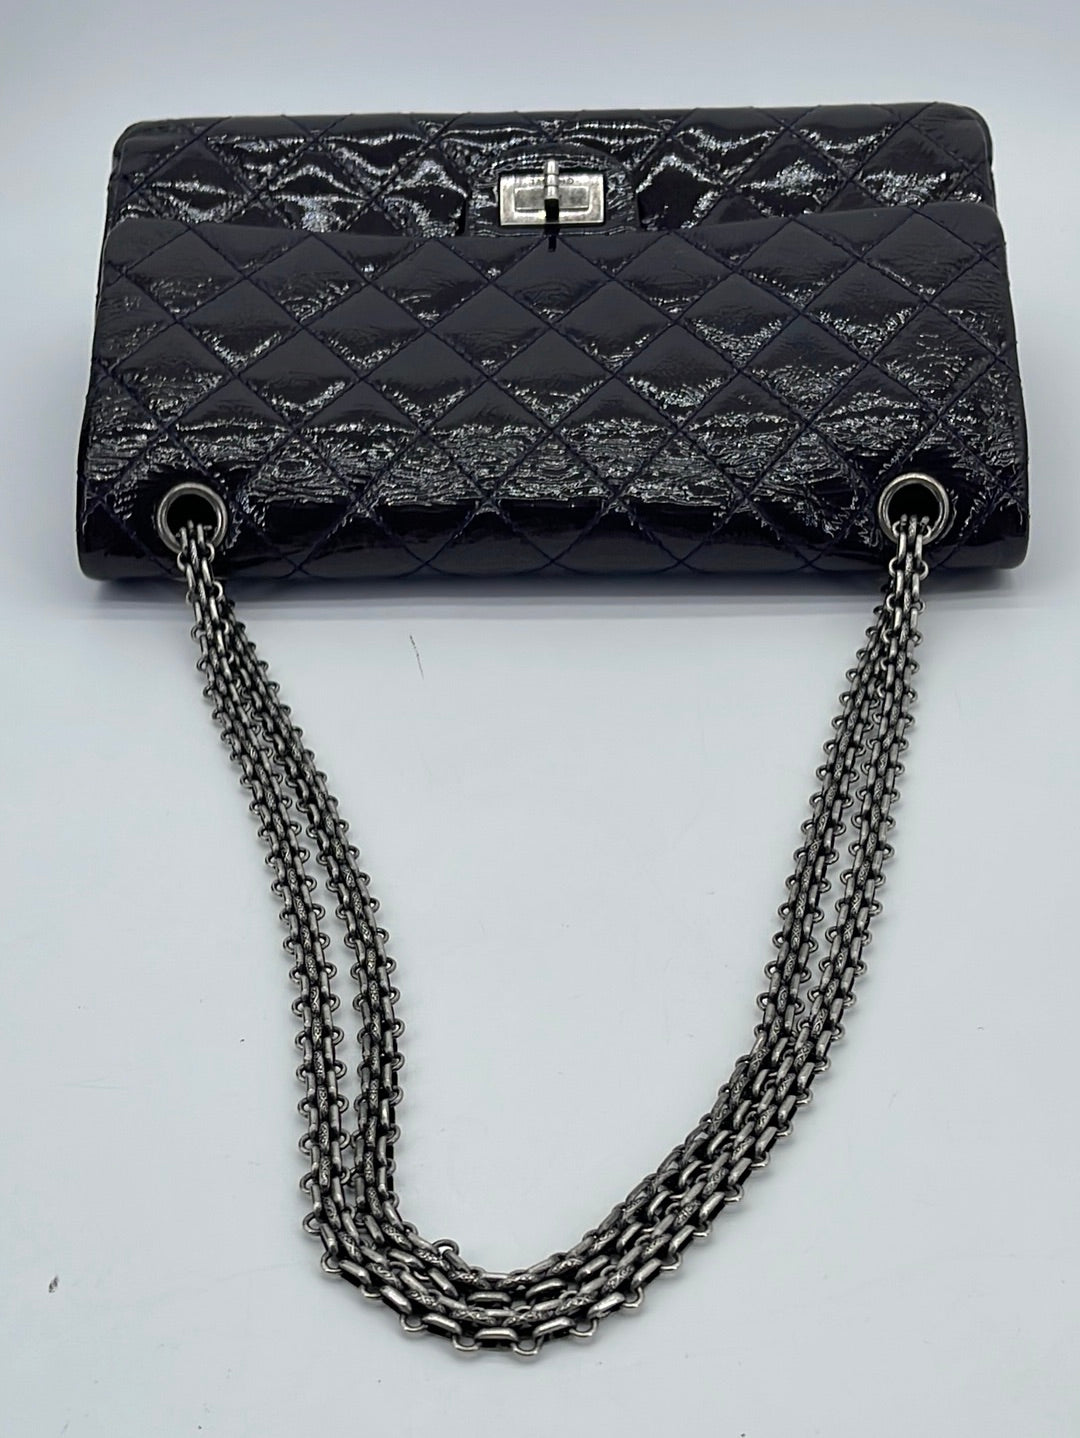 Chanel Black Patent Leather East West Reissue Flap Bag – Only Authentics